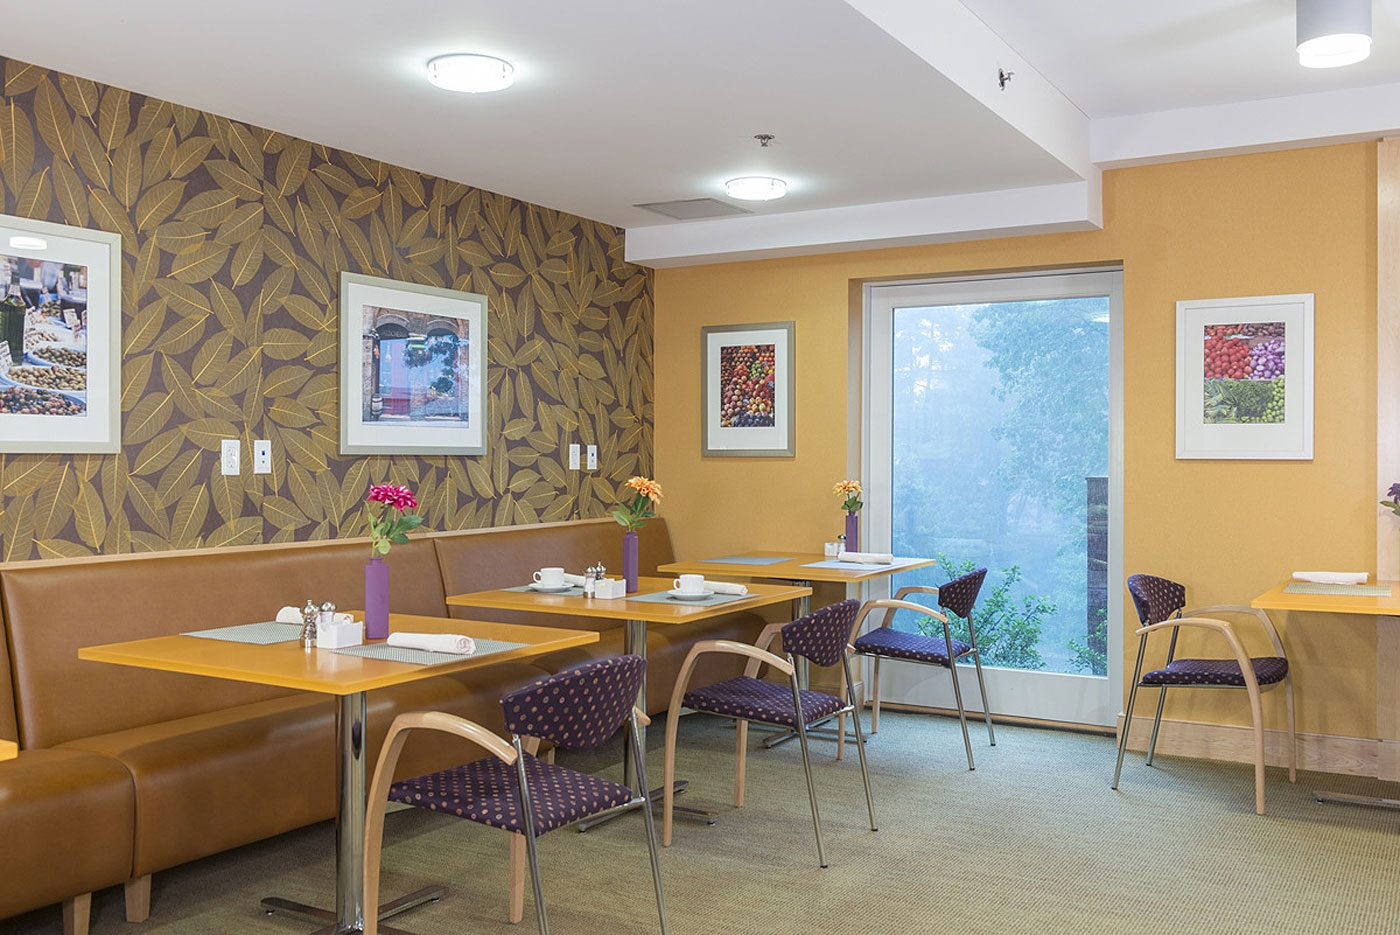 Cozy corner for smaller group socializing in a CCRC community dining area